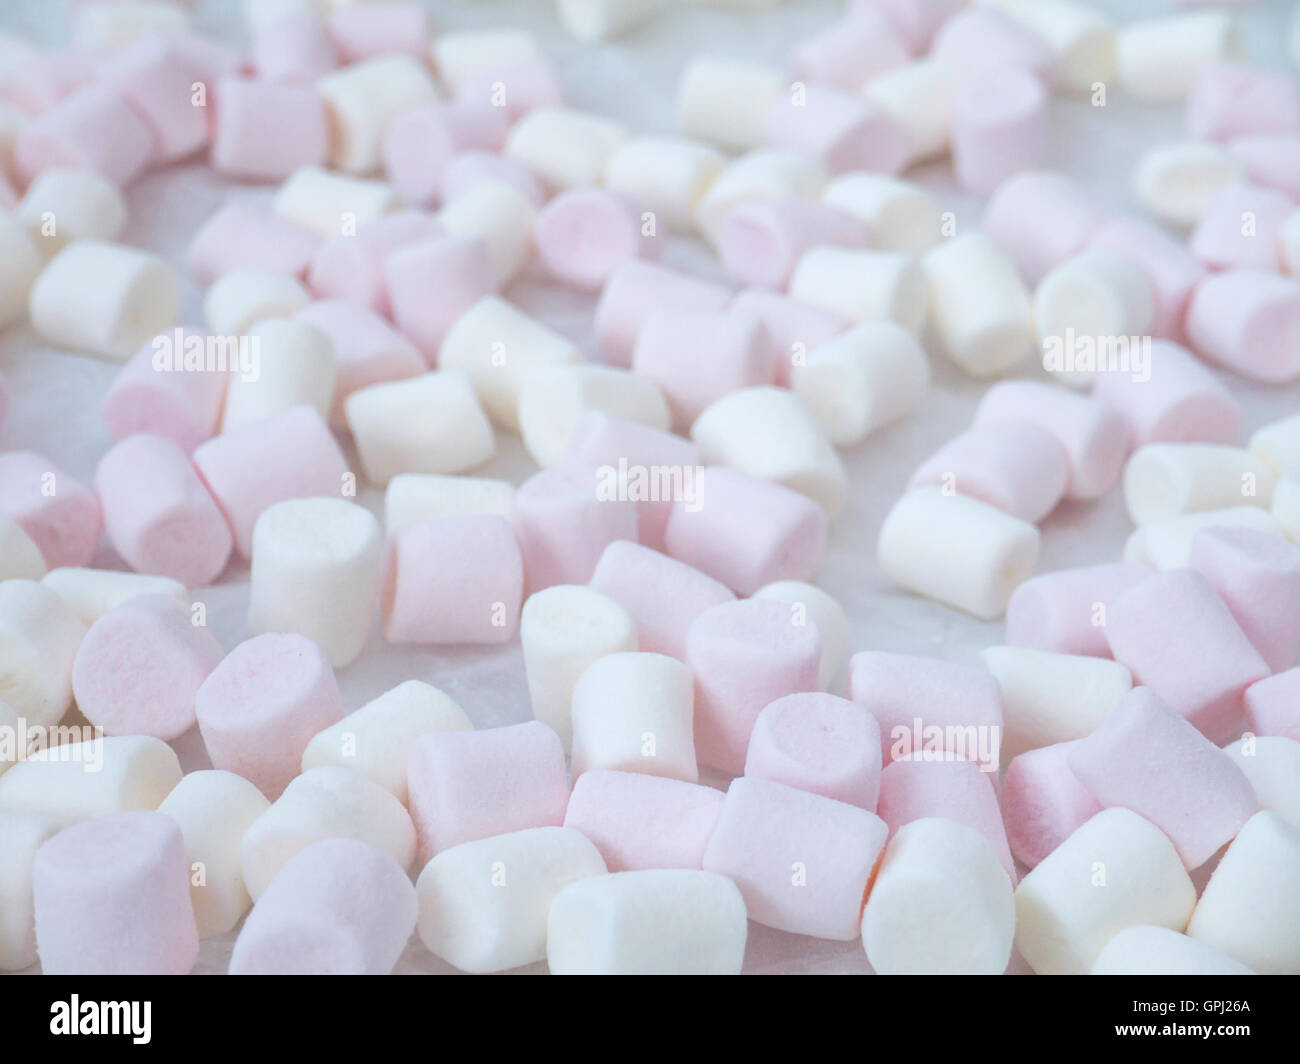 White and pink marshmallow shallow focus background Stock Photo